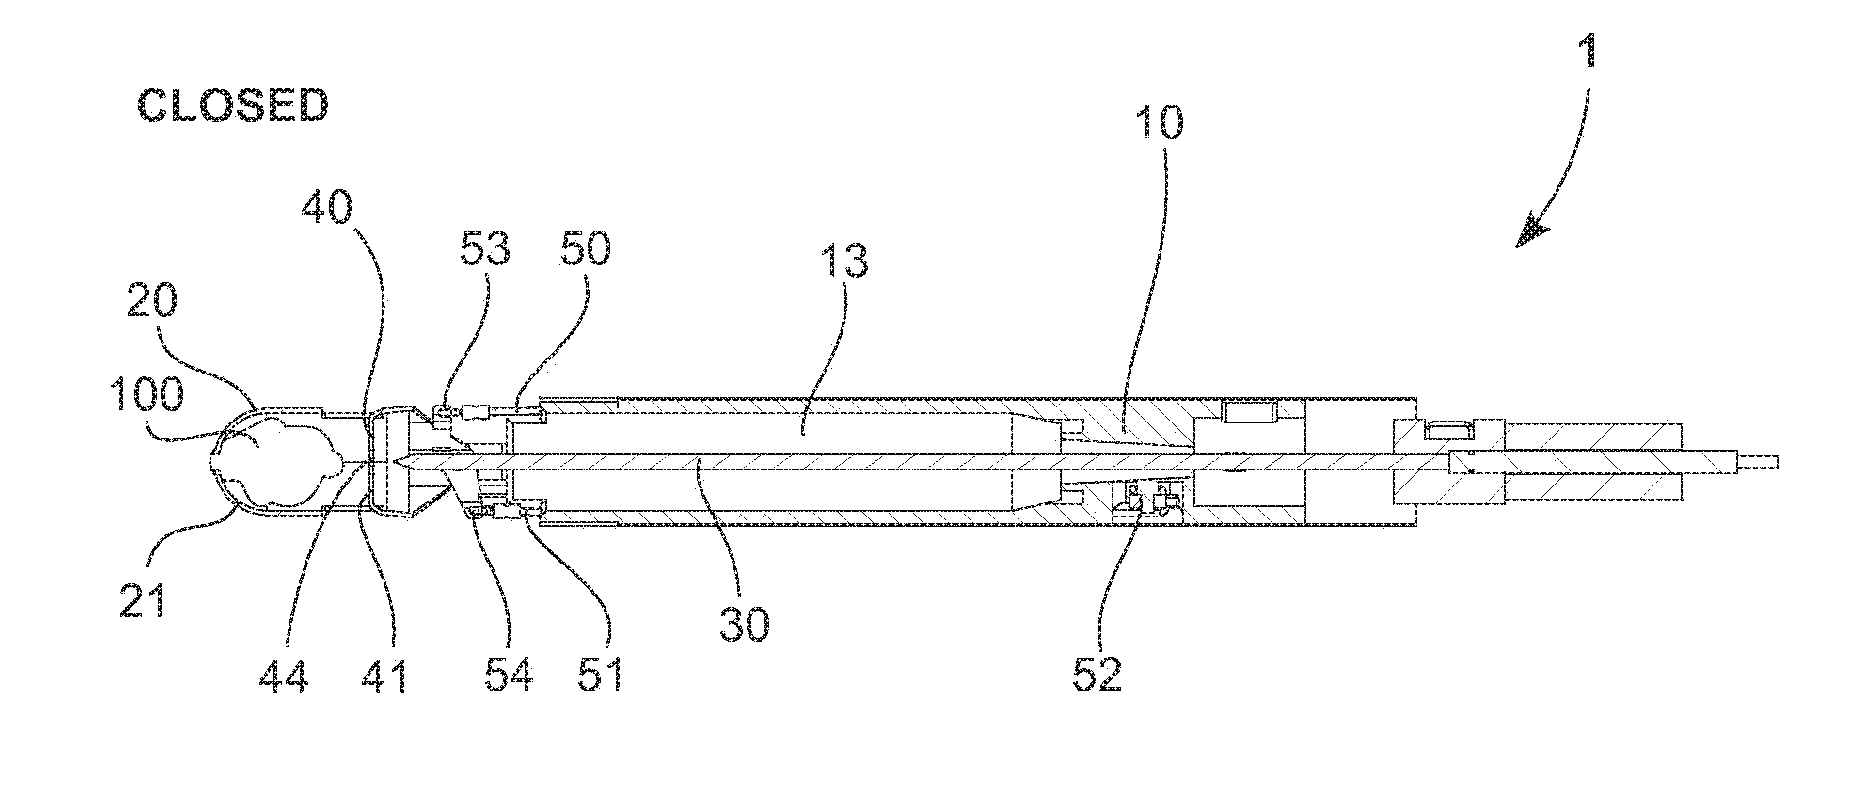 Endoscopic device for multiple sample biopsy